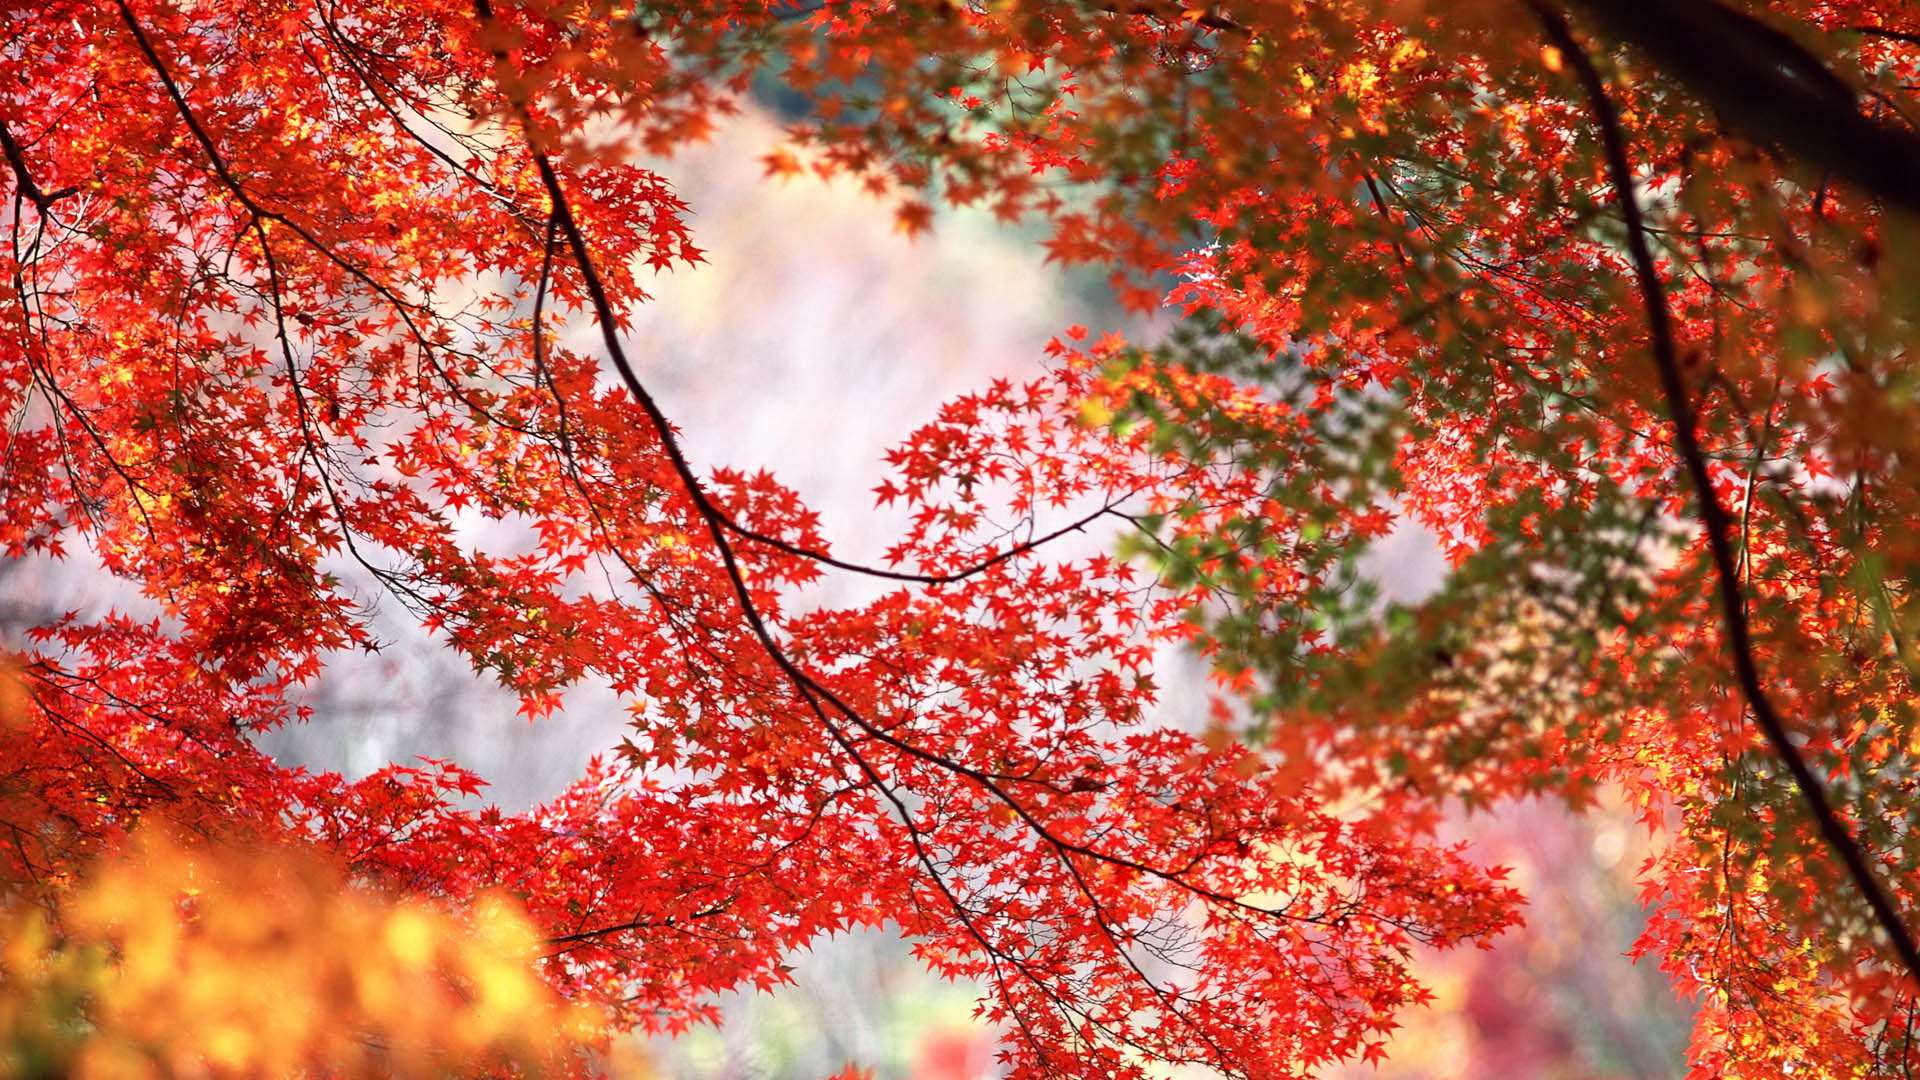 Photos of Natural Scene - Red Maple Trees on Thin Branches, Mere Background, Combines a Great Scene 1920X1080 free wallpaper download